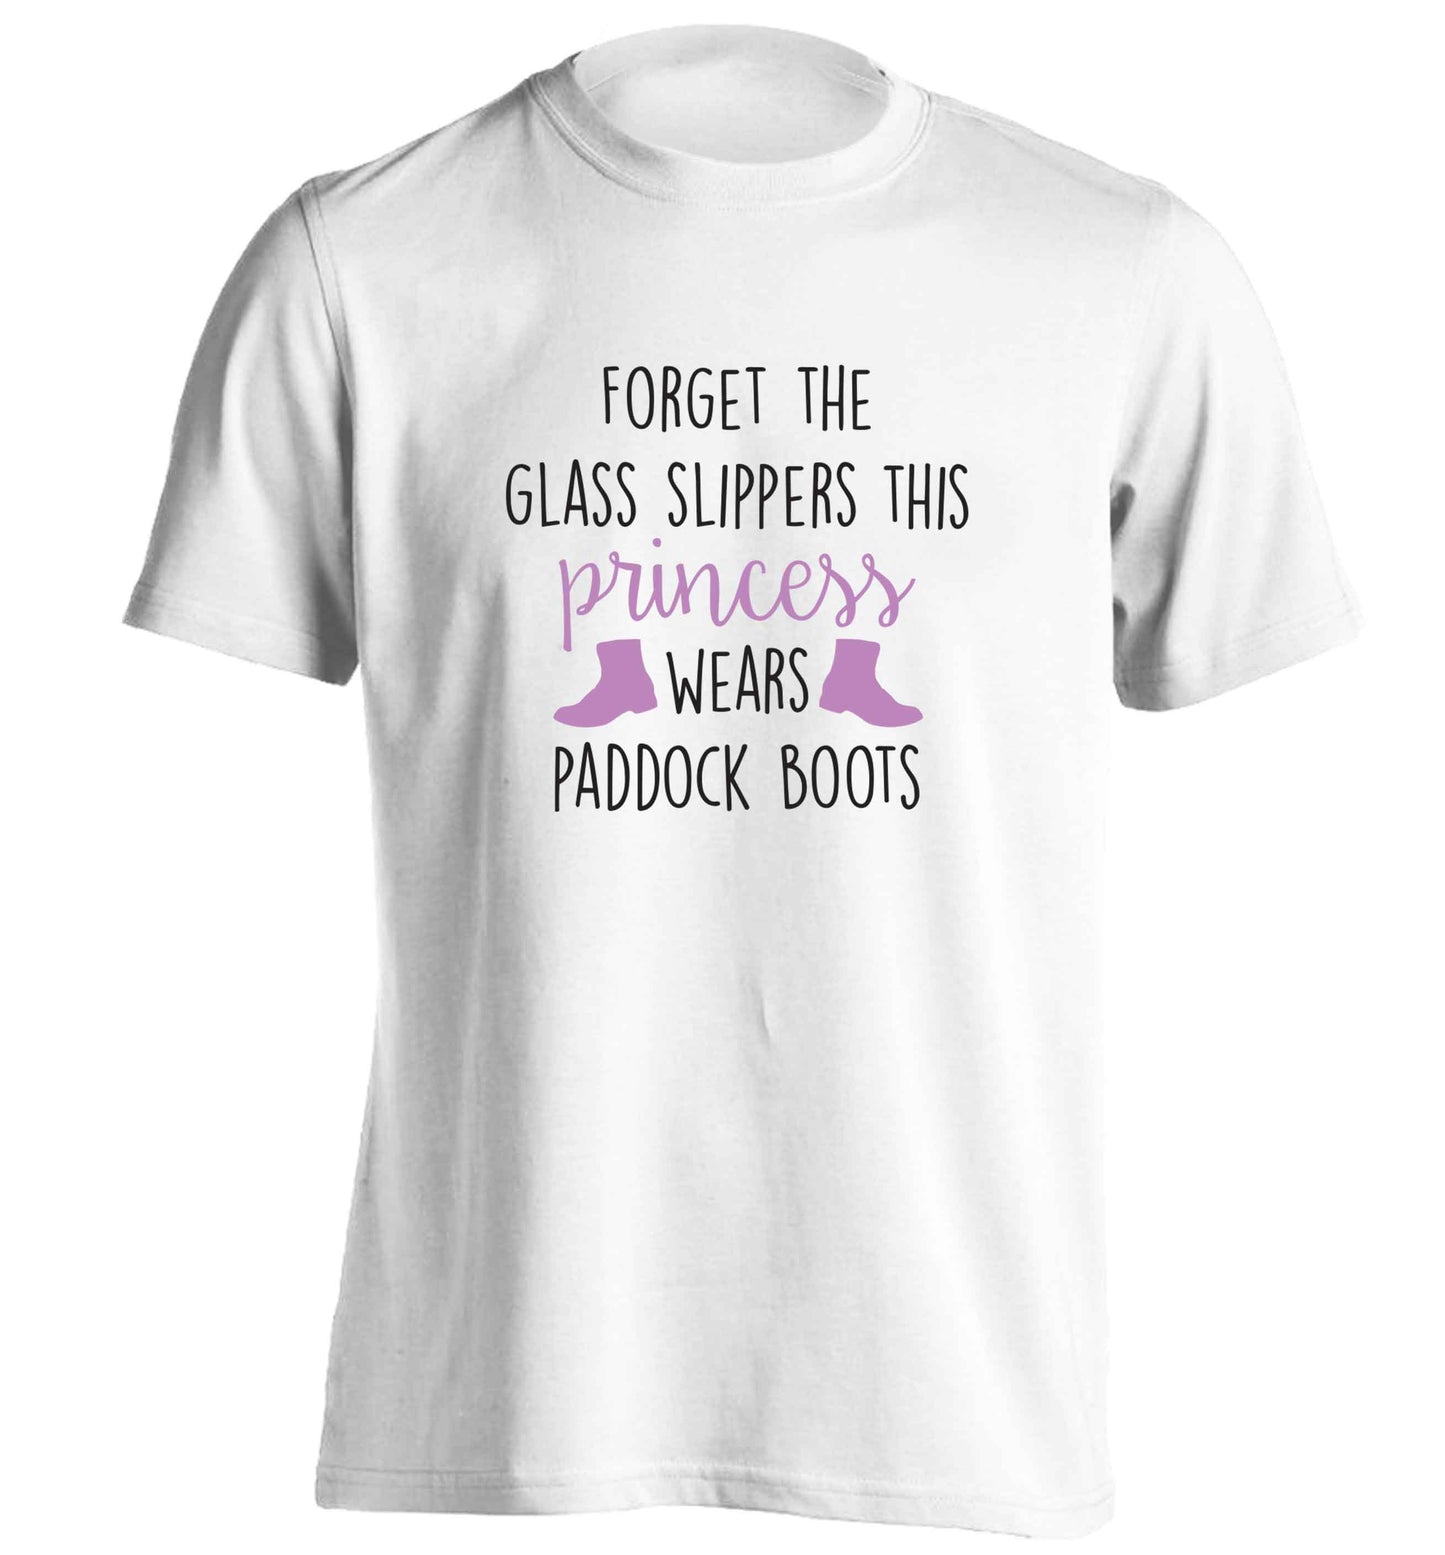 Forget the glass slippers this princess wears paddock boots adults unisex white Tshirt 2XL